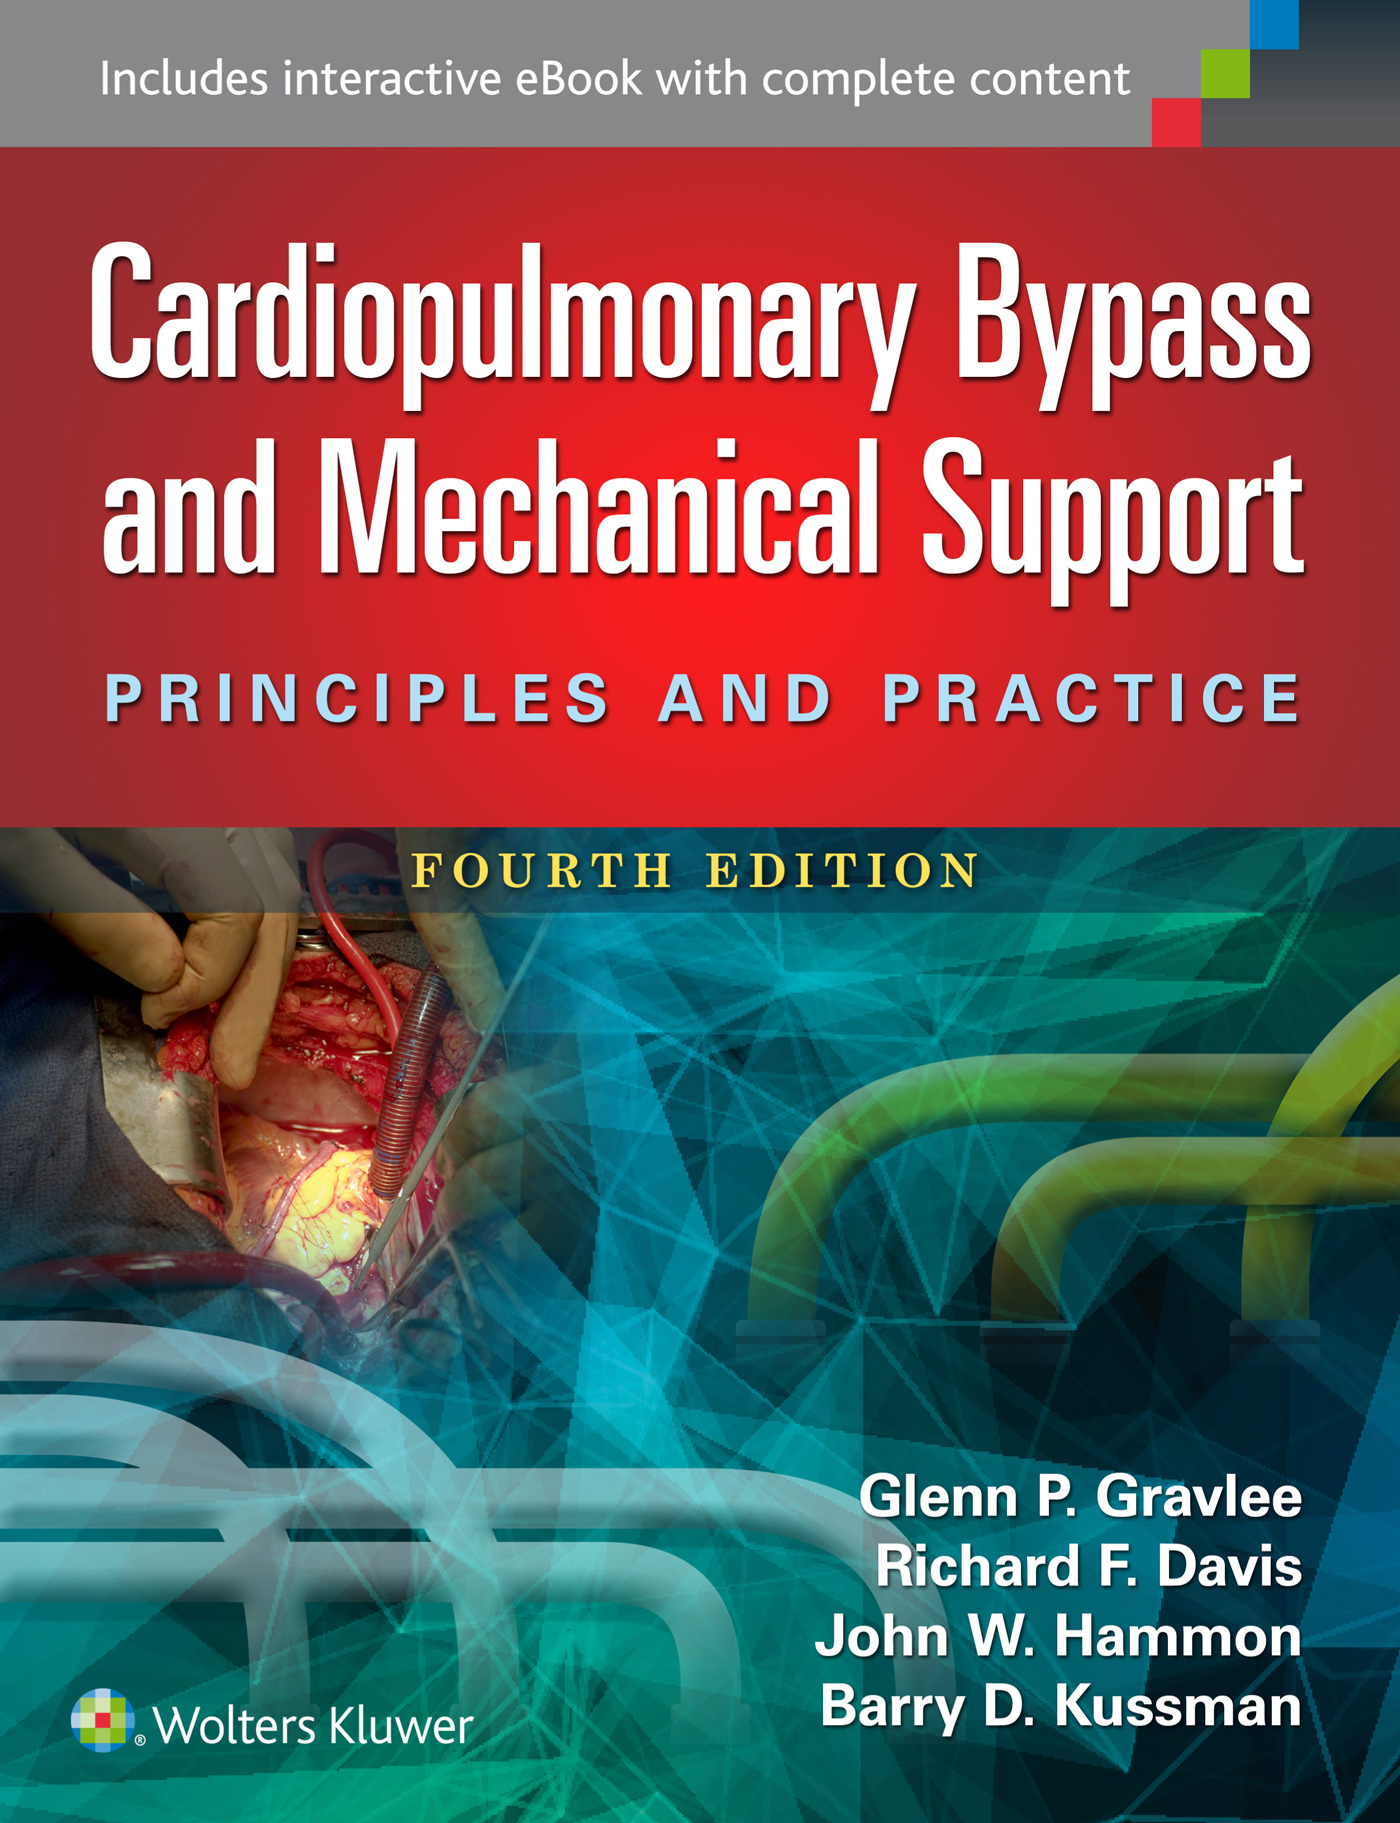 ISBN: 9781451193619 CARDIOPULMONARY BYPASS AND MECHANICAL SUPPORT